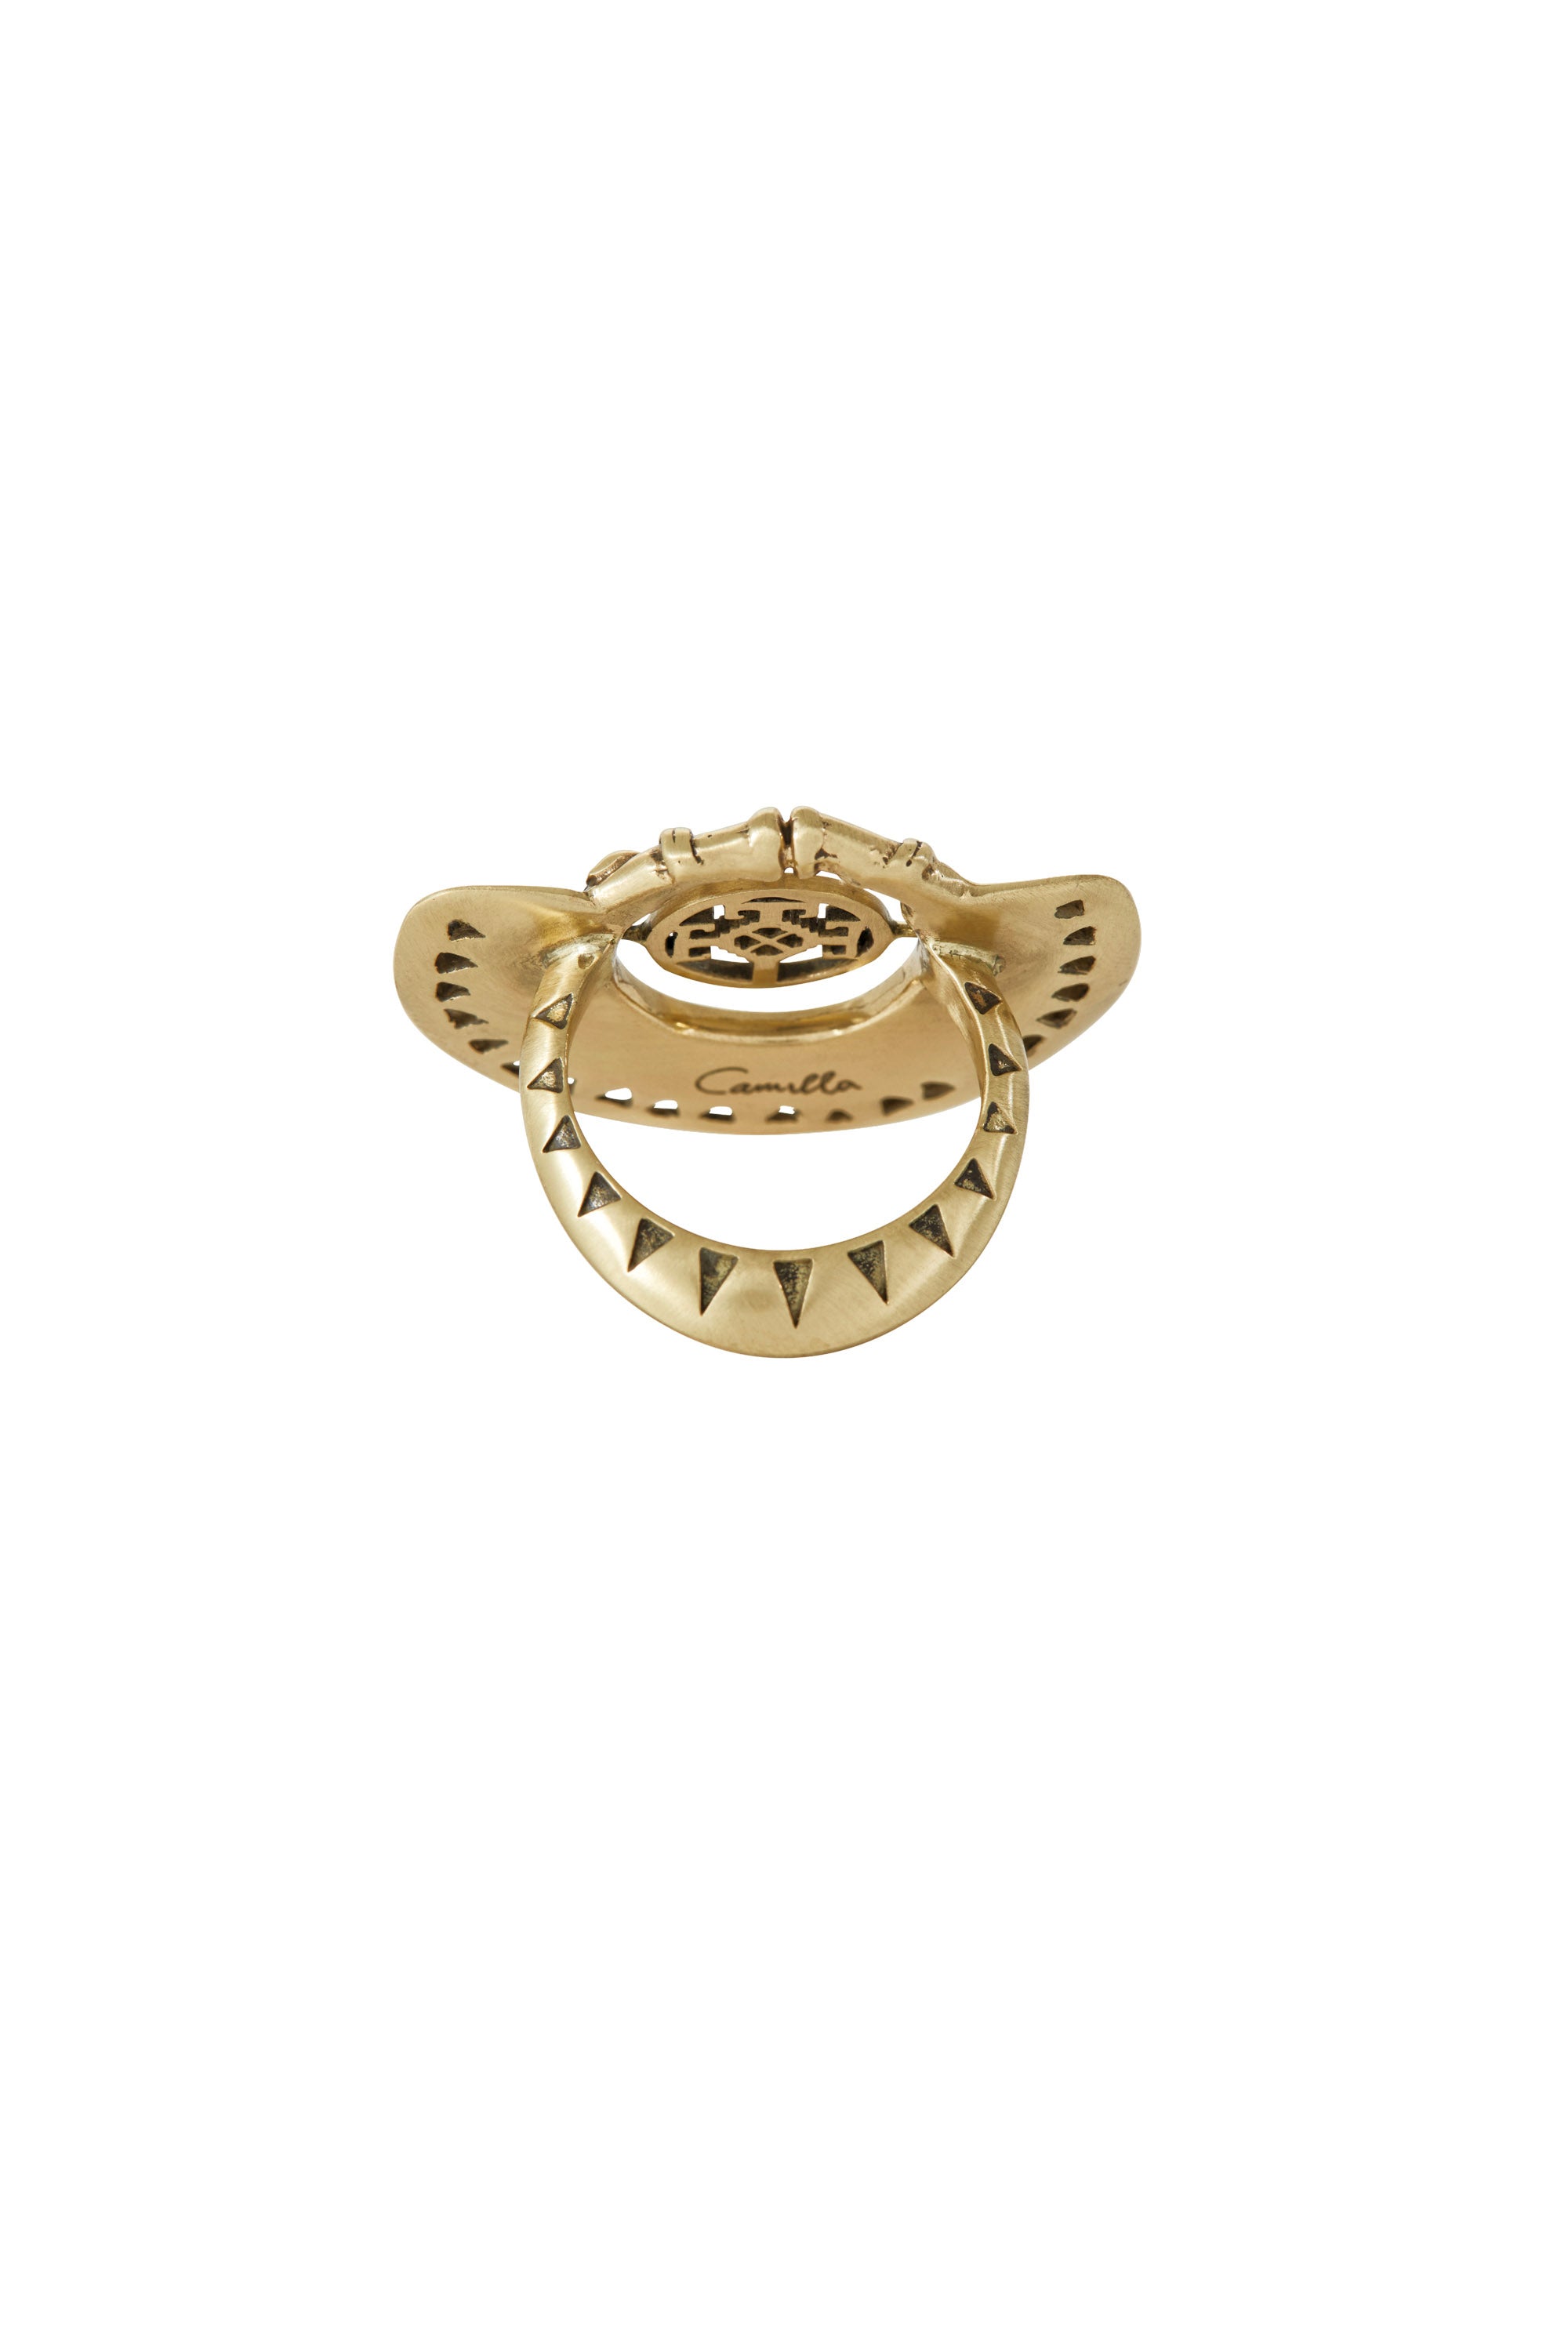 GOLD BRASS CUT OUT SPIN RING